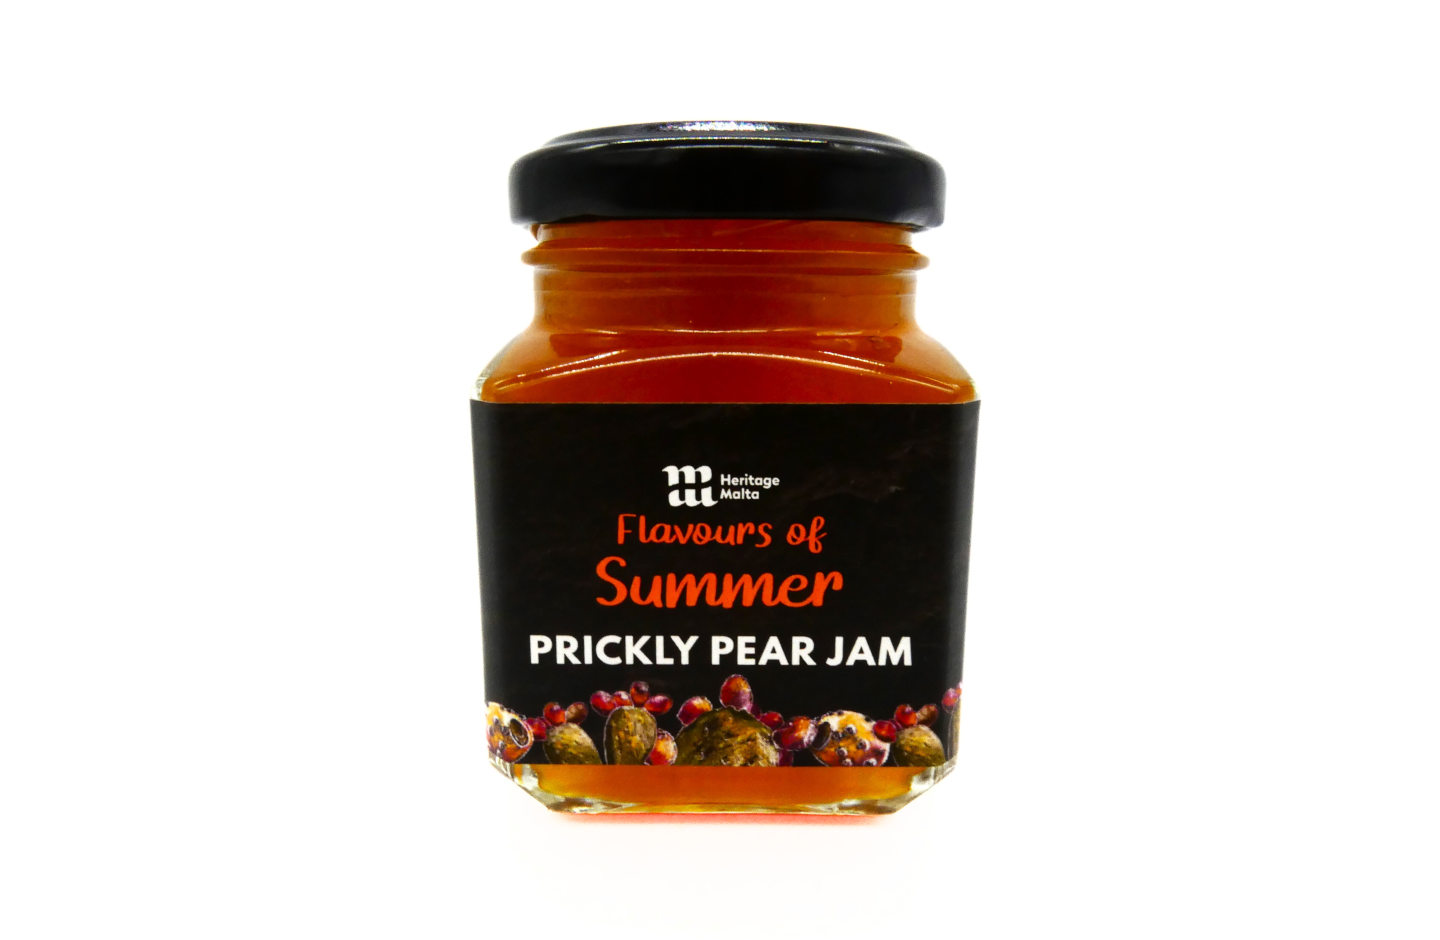 Flavours of Summer: Prickly Pear Jam -140g